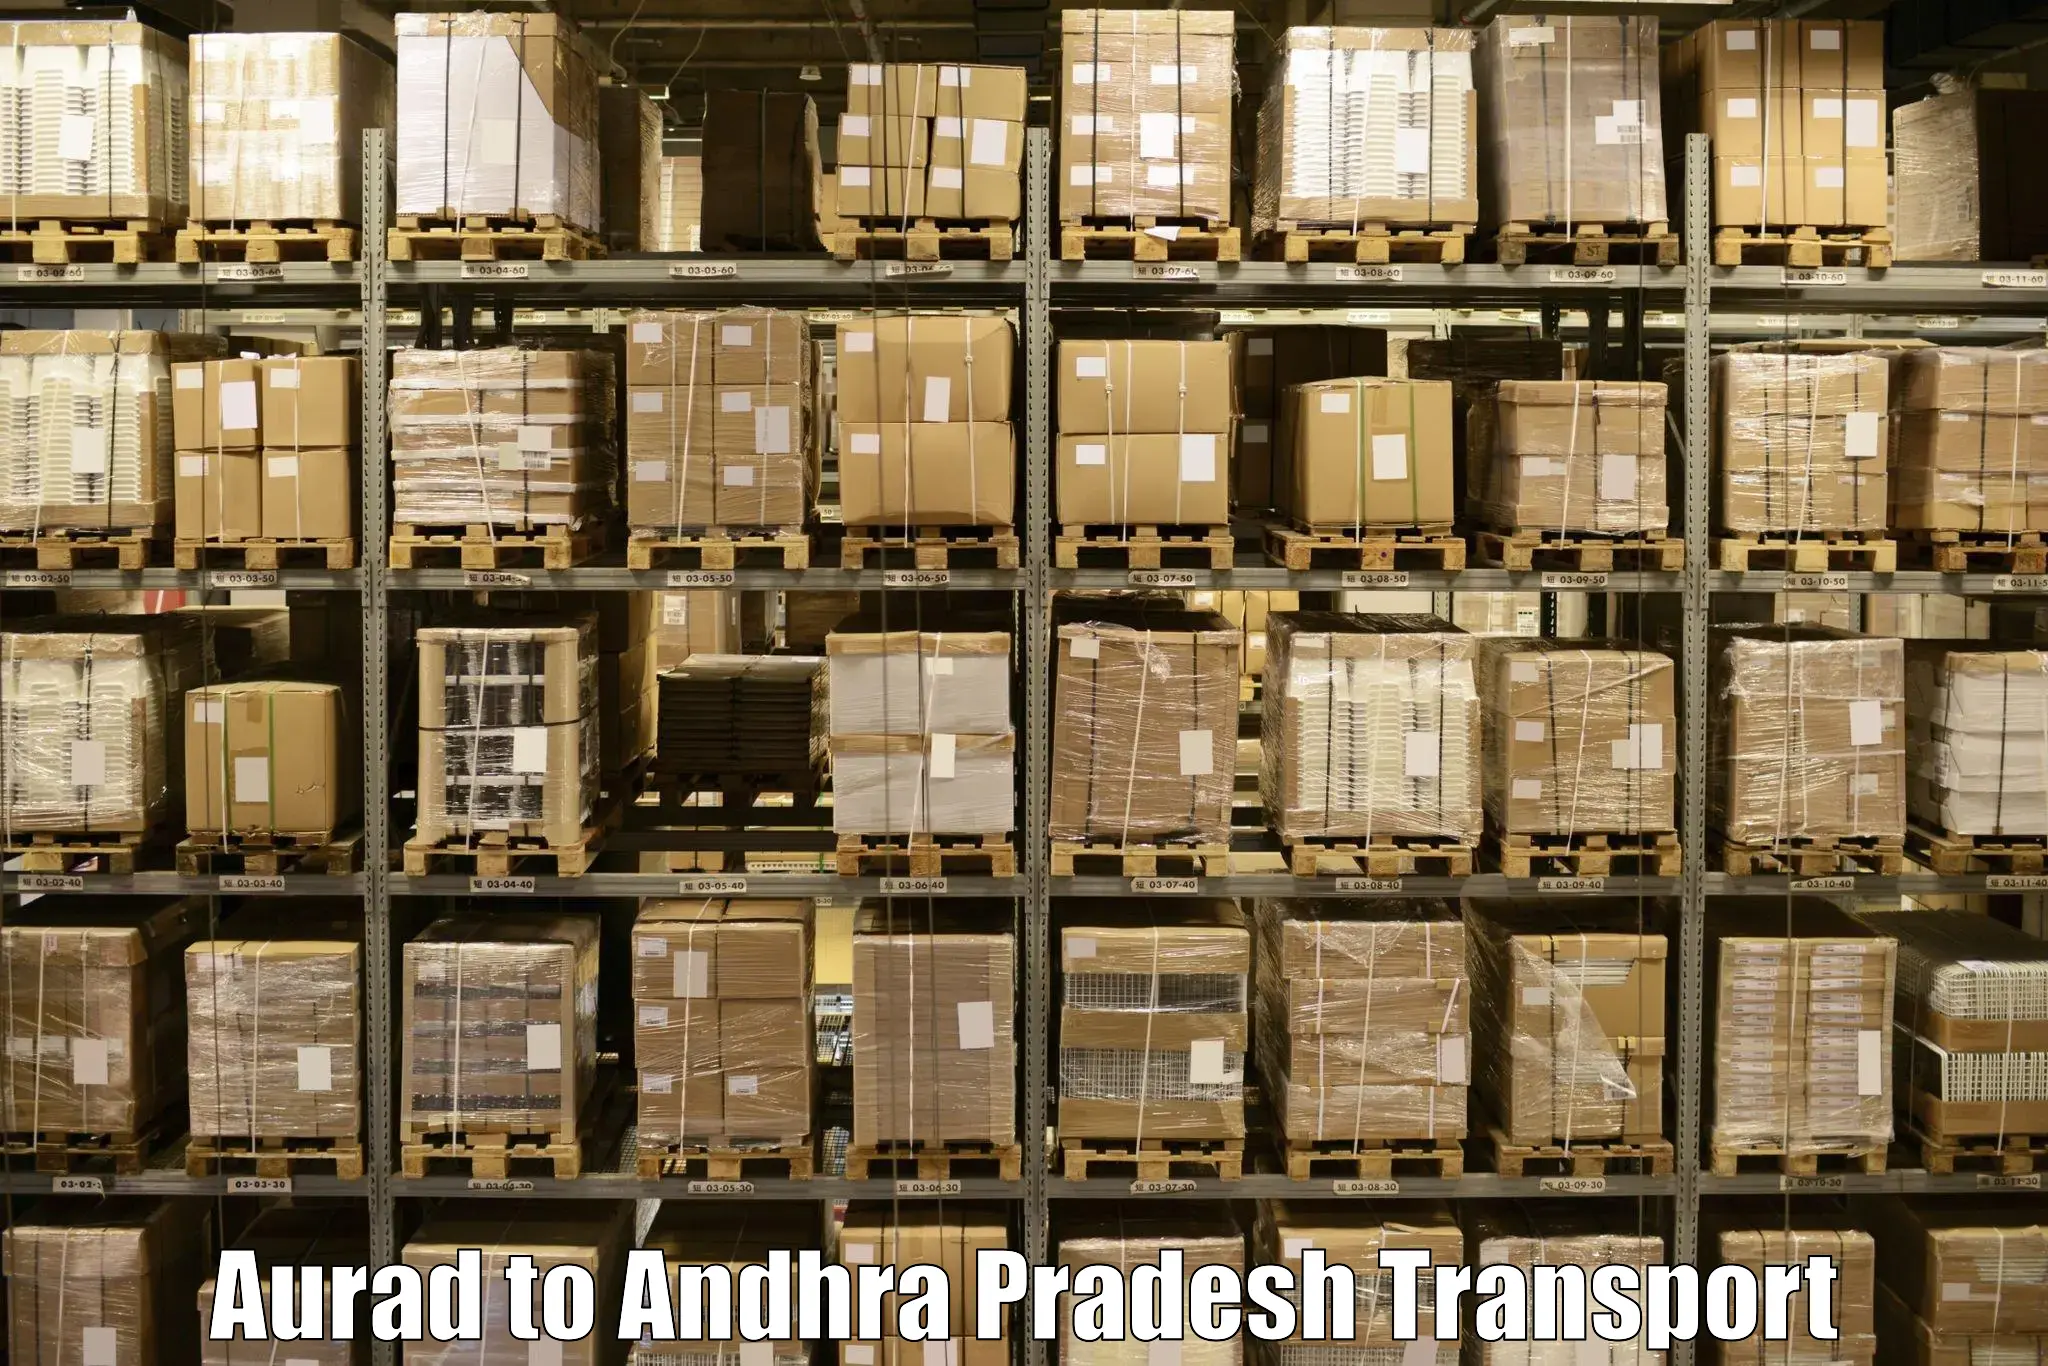 Best transport services in India Aurad to Pakala